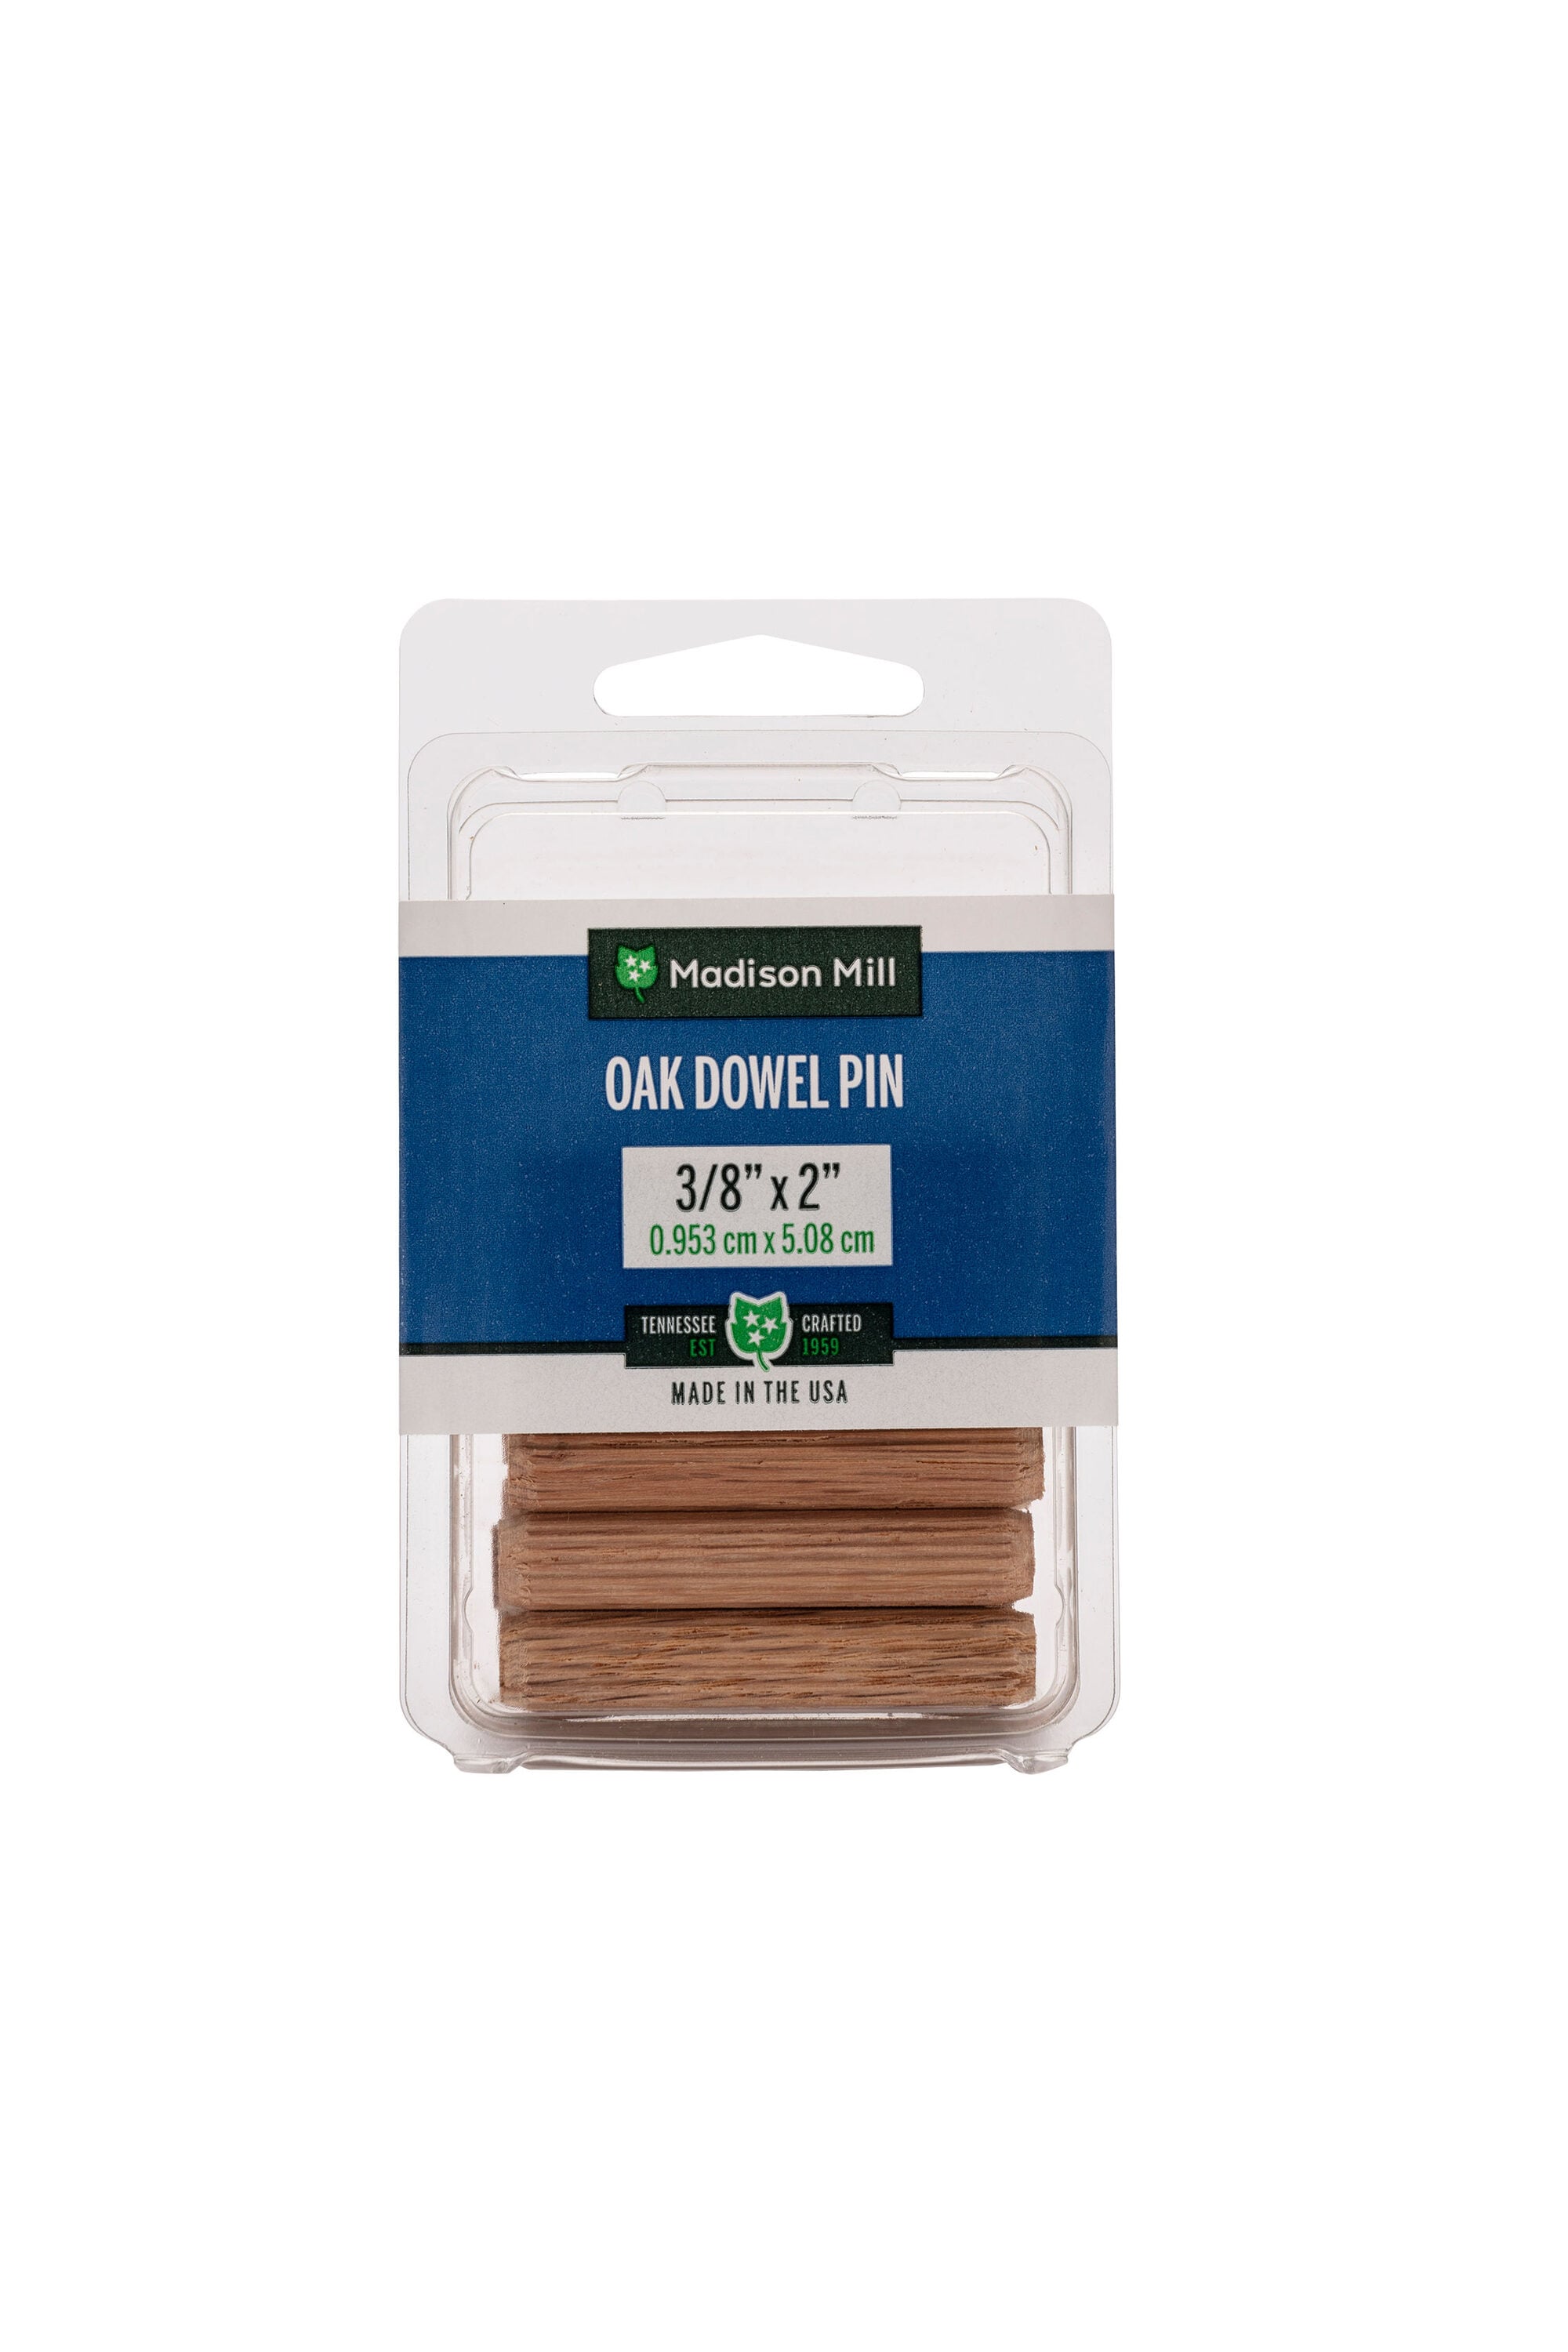 25 Pieces Furniture Wood Plute Pins Wooden Dowels Replacement 60x8mm -  Brown - Bed Bath & Beyond - 33904370